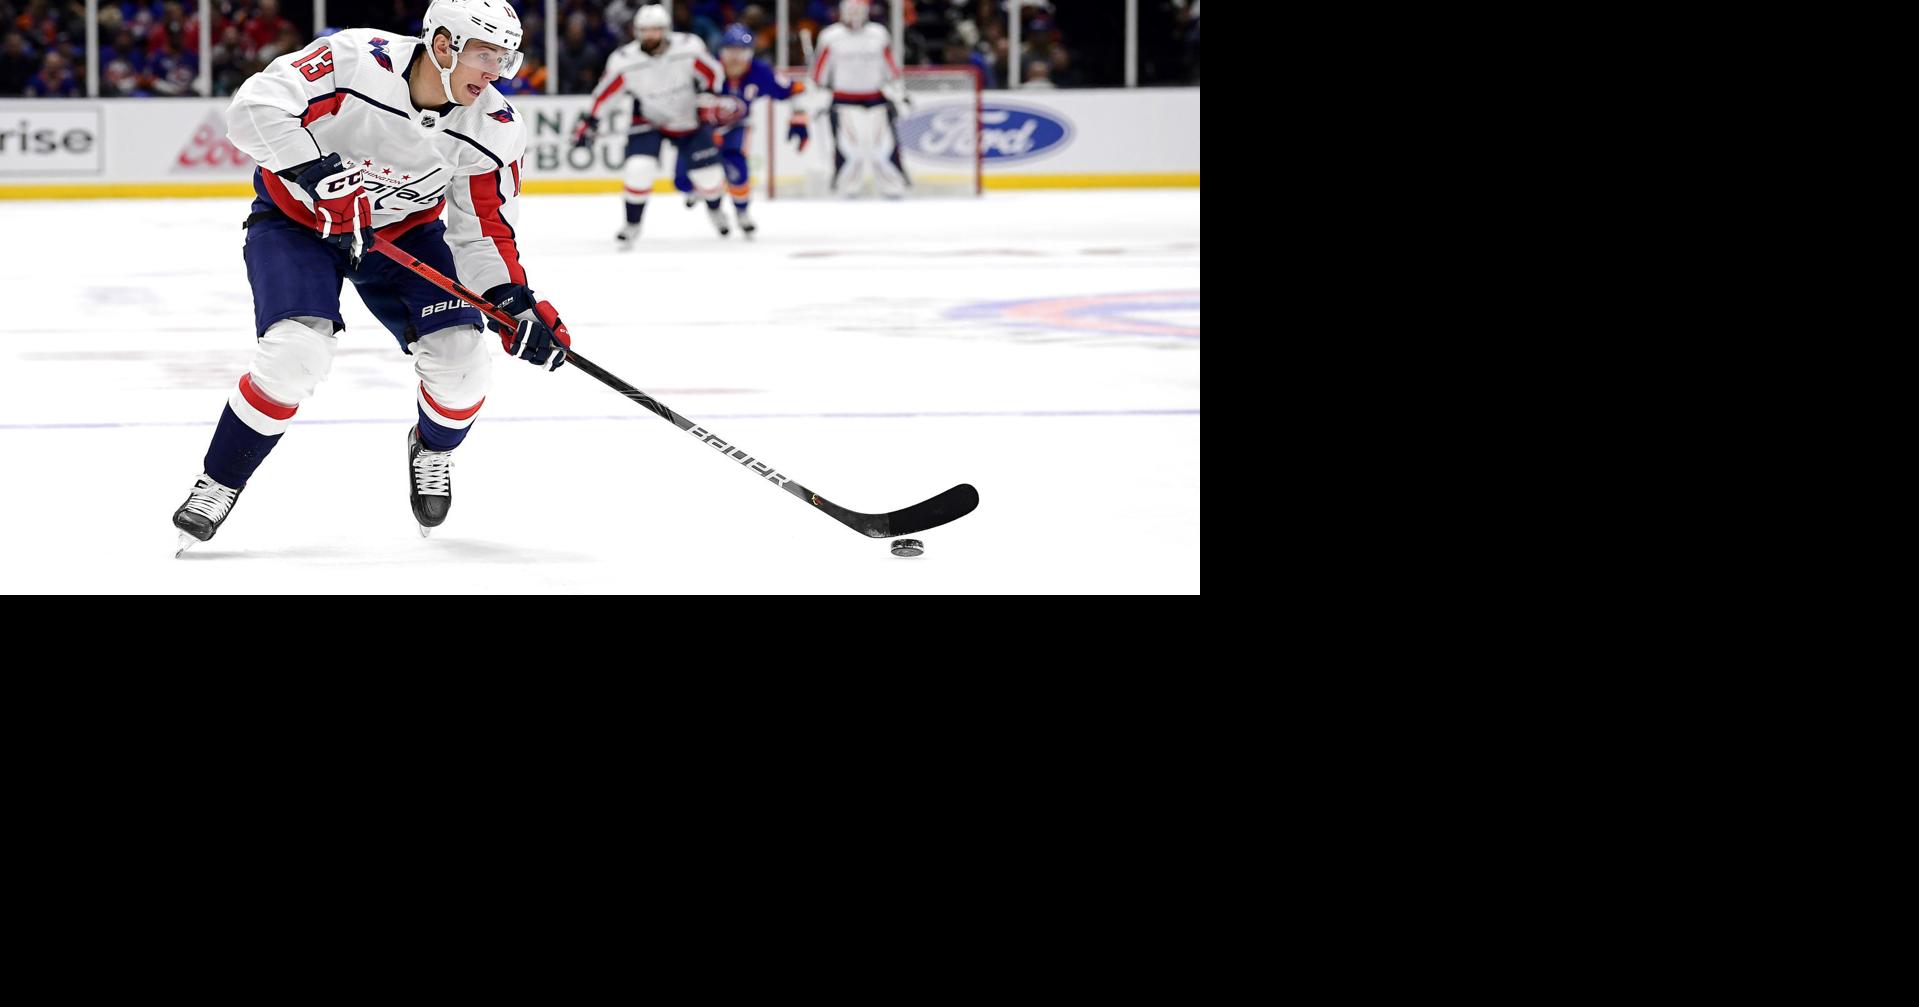 His confidence shattered in the playoffs, Jakub Vrana is out to